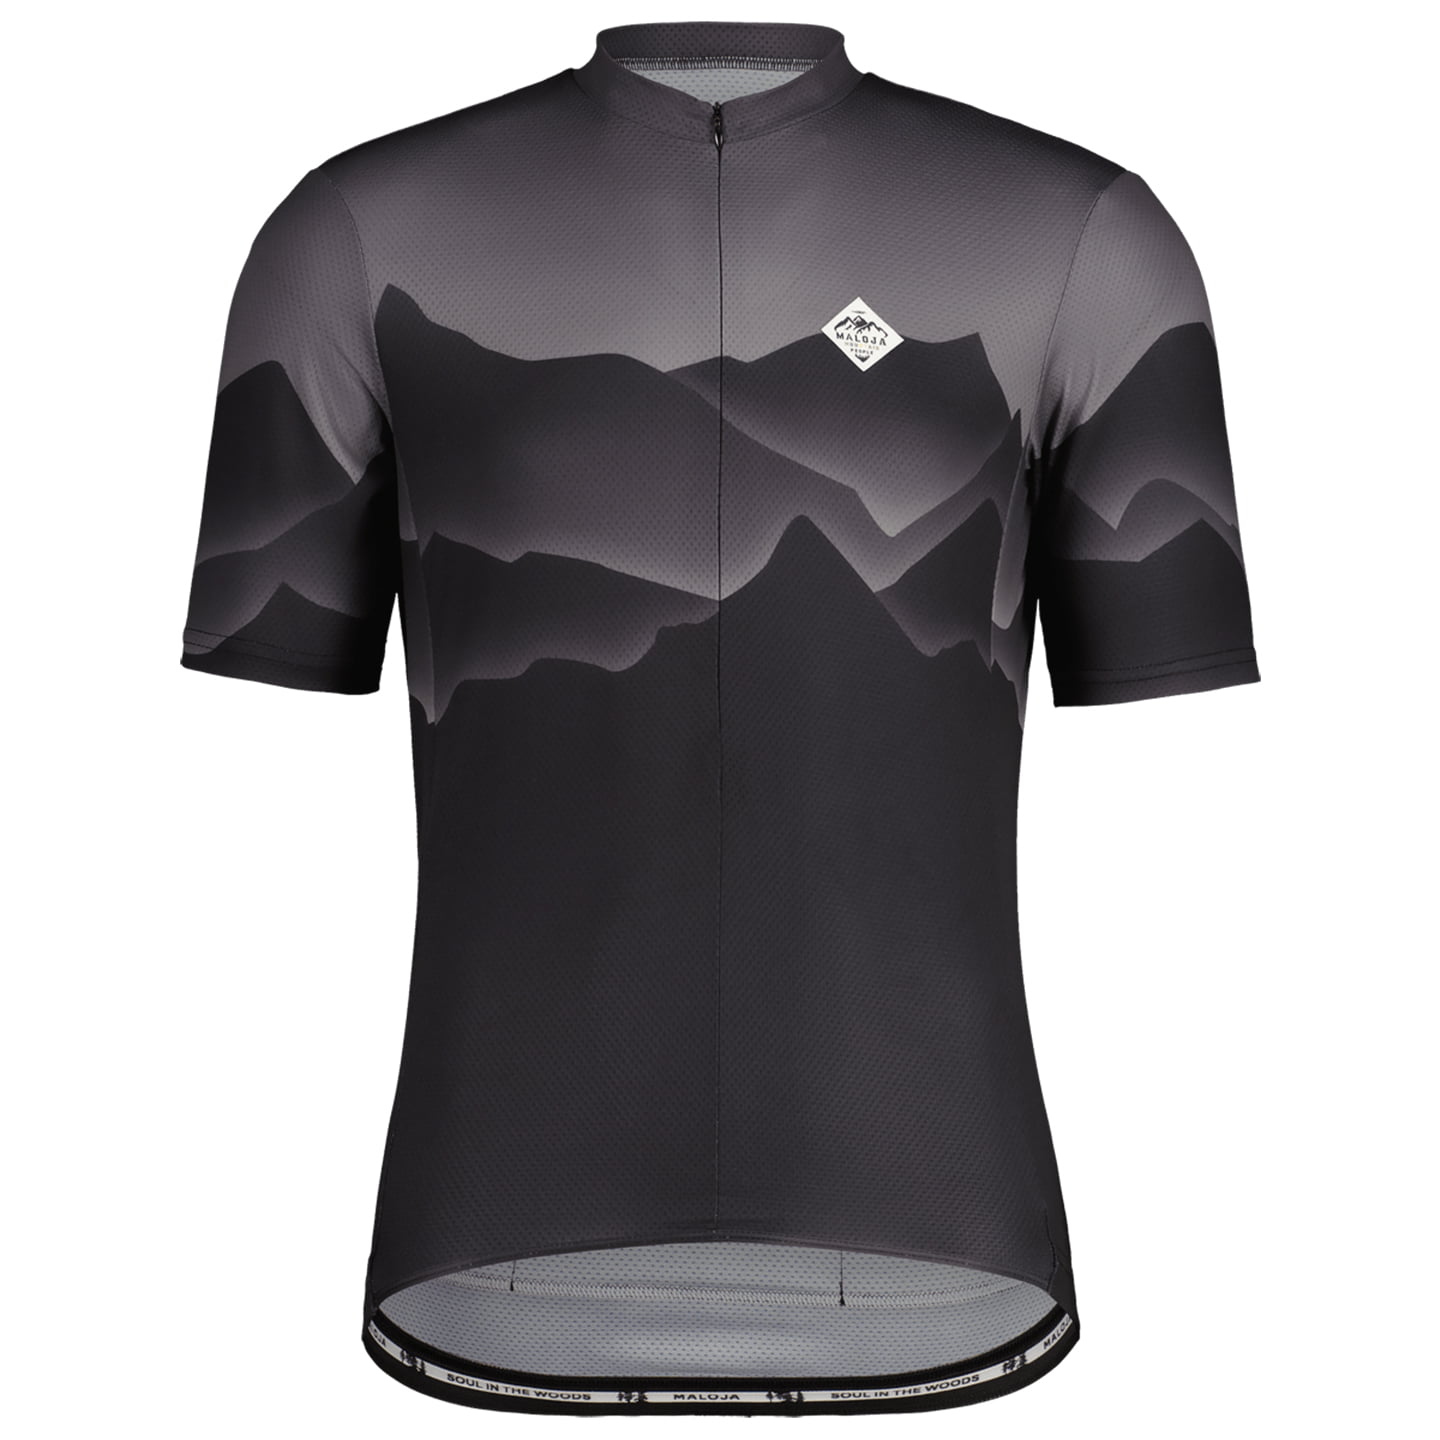 MALOJA ChandolinM. Short Sleeve Jersey Short Sleeve Jersey, for men, size 2XL, Cycling jersey, Cycle clothing